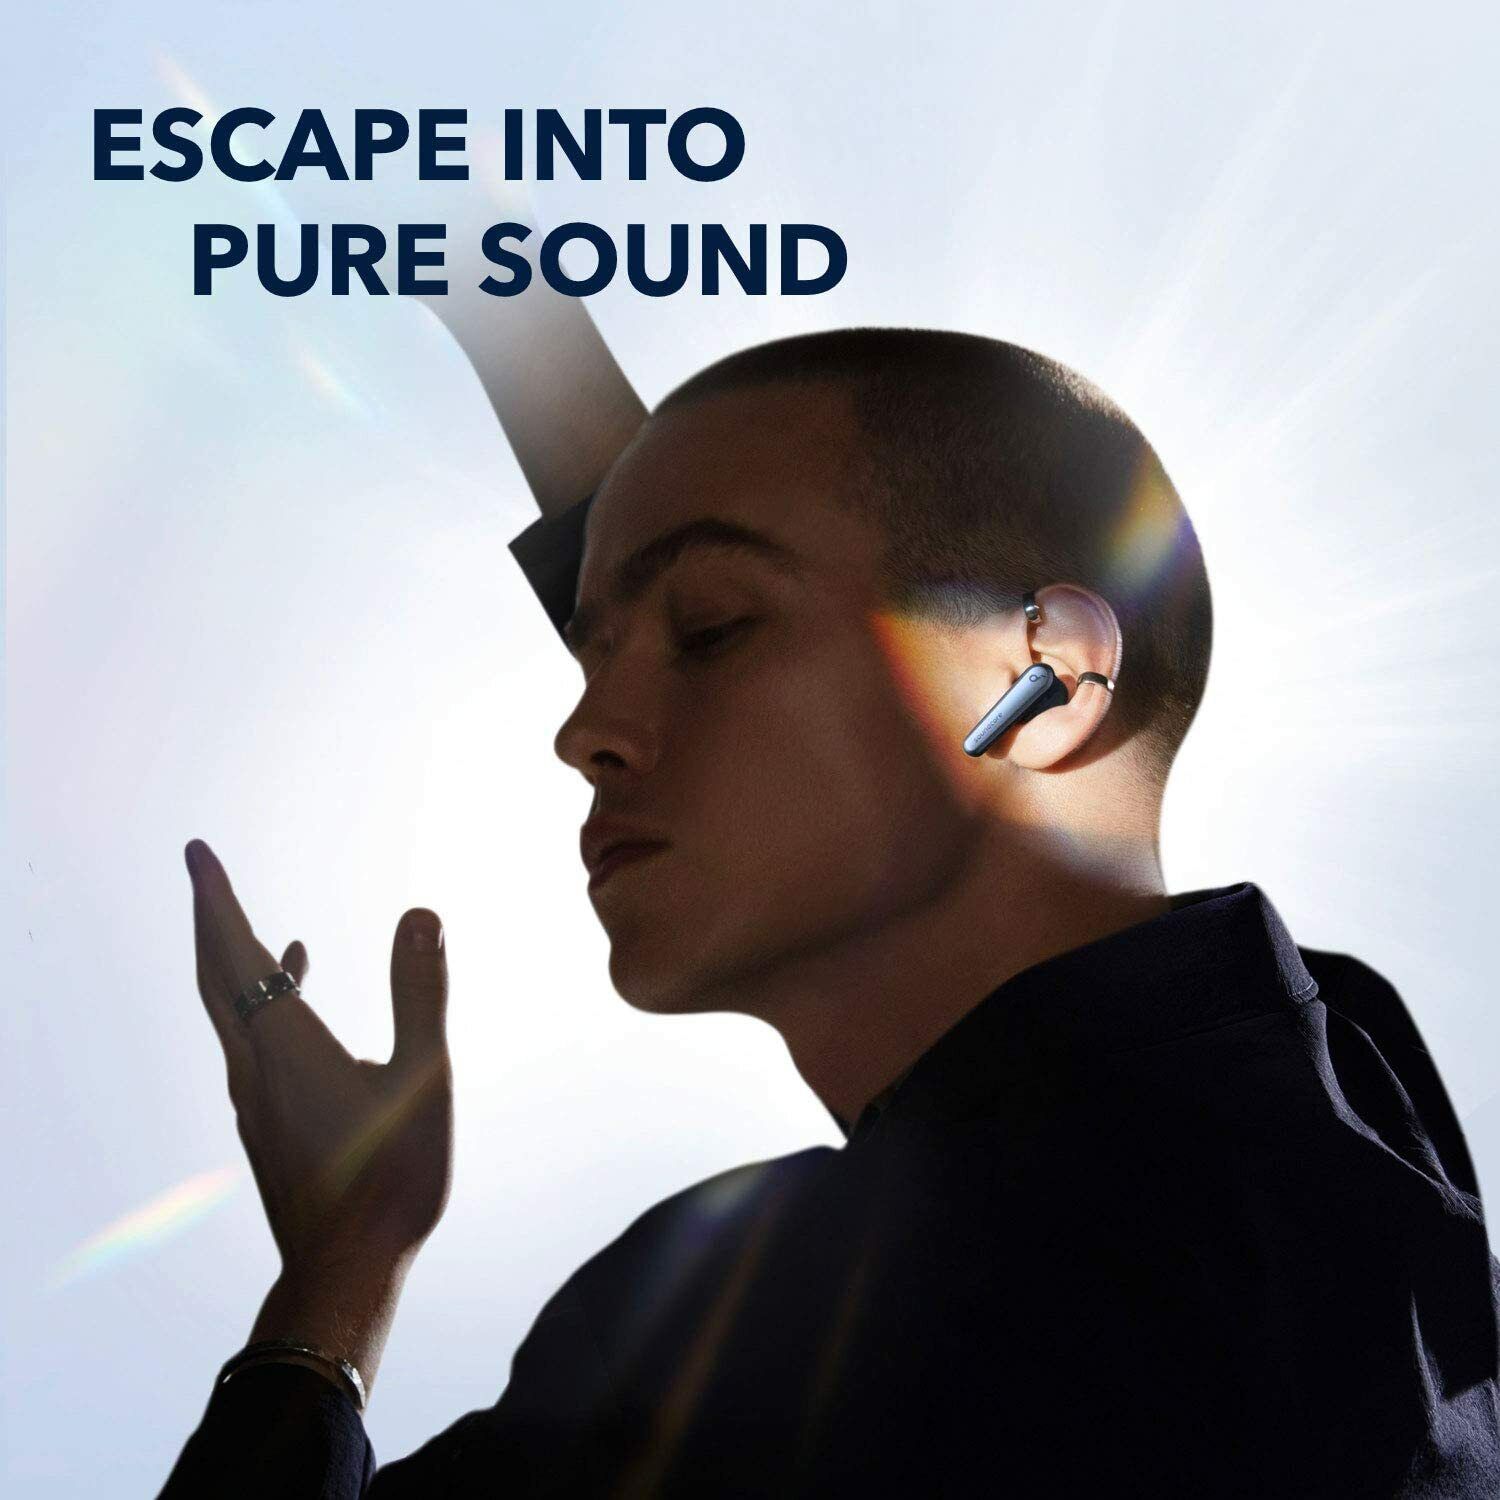 Wireless Earbuds for iPhone by Soundcore